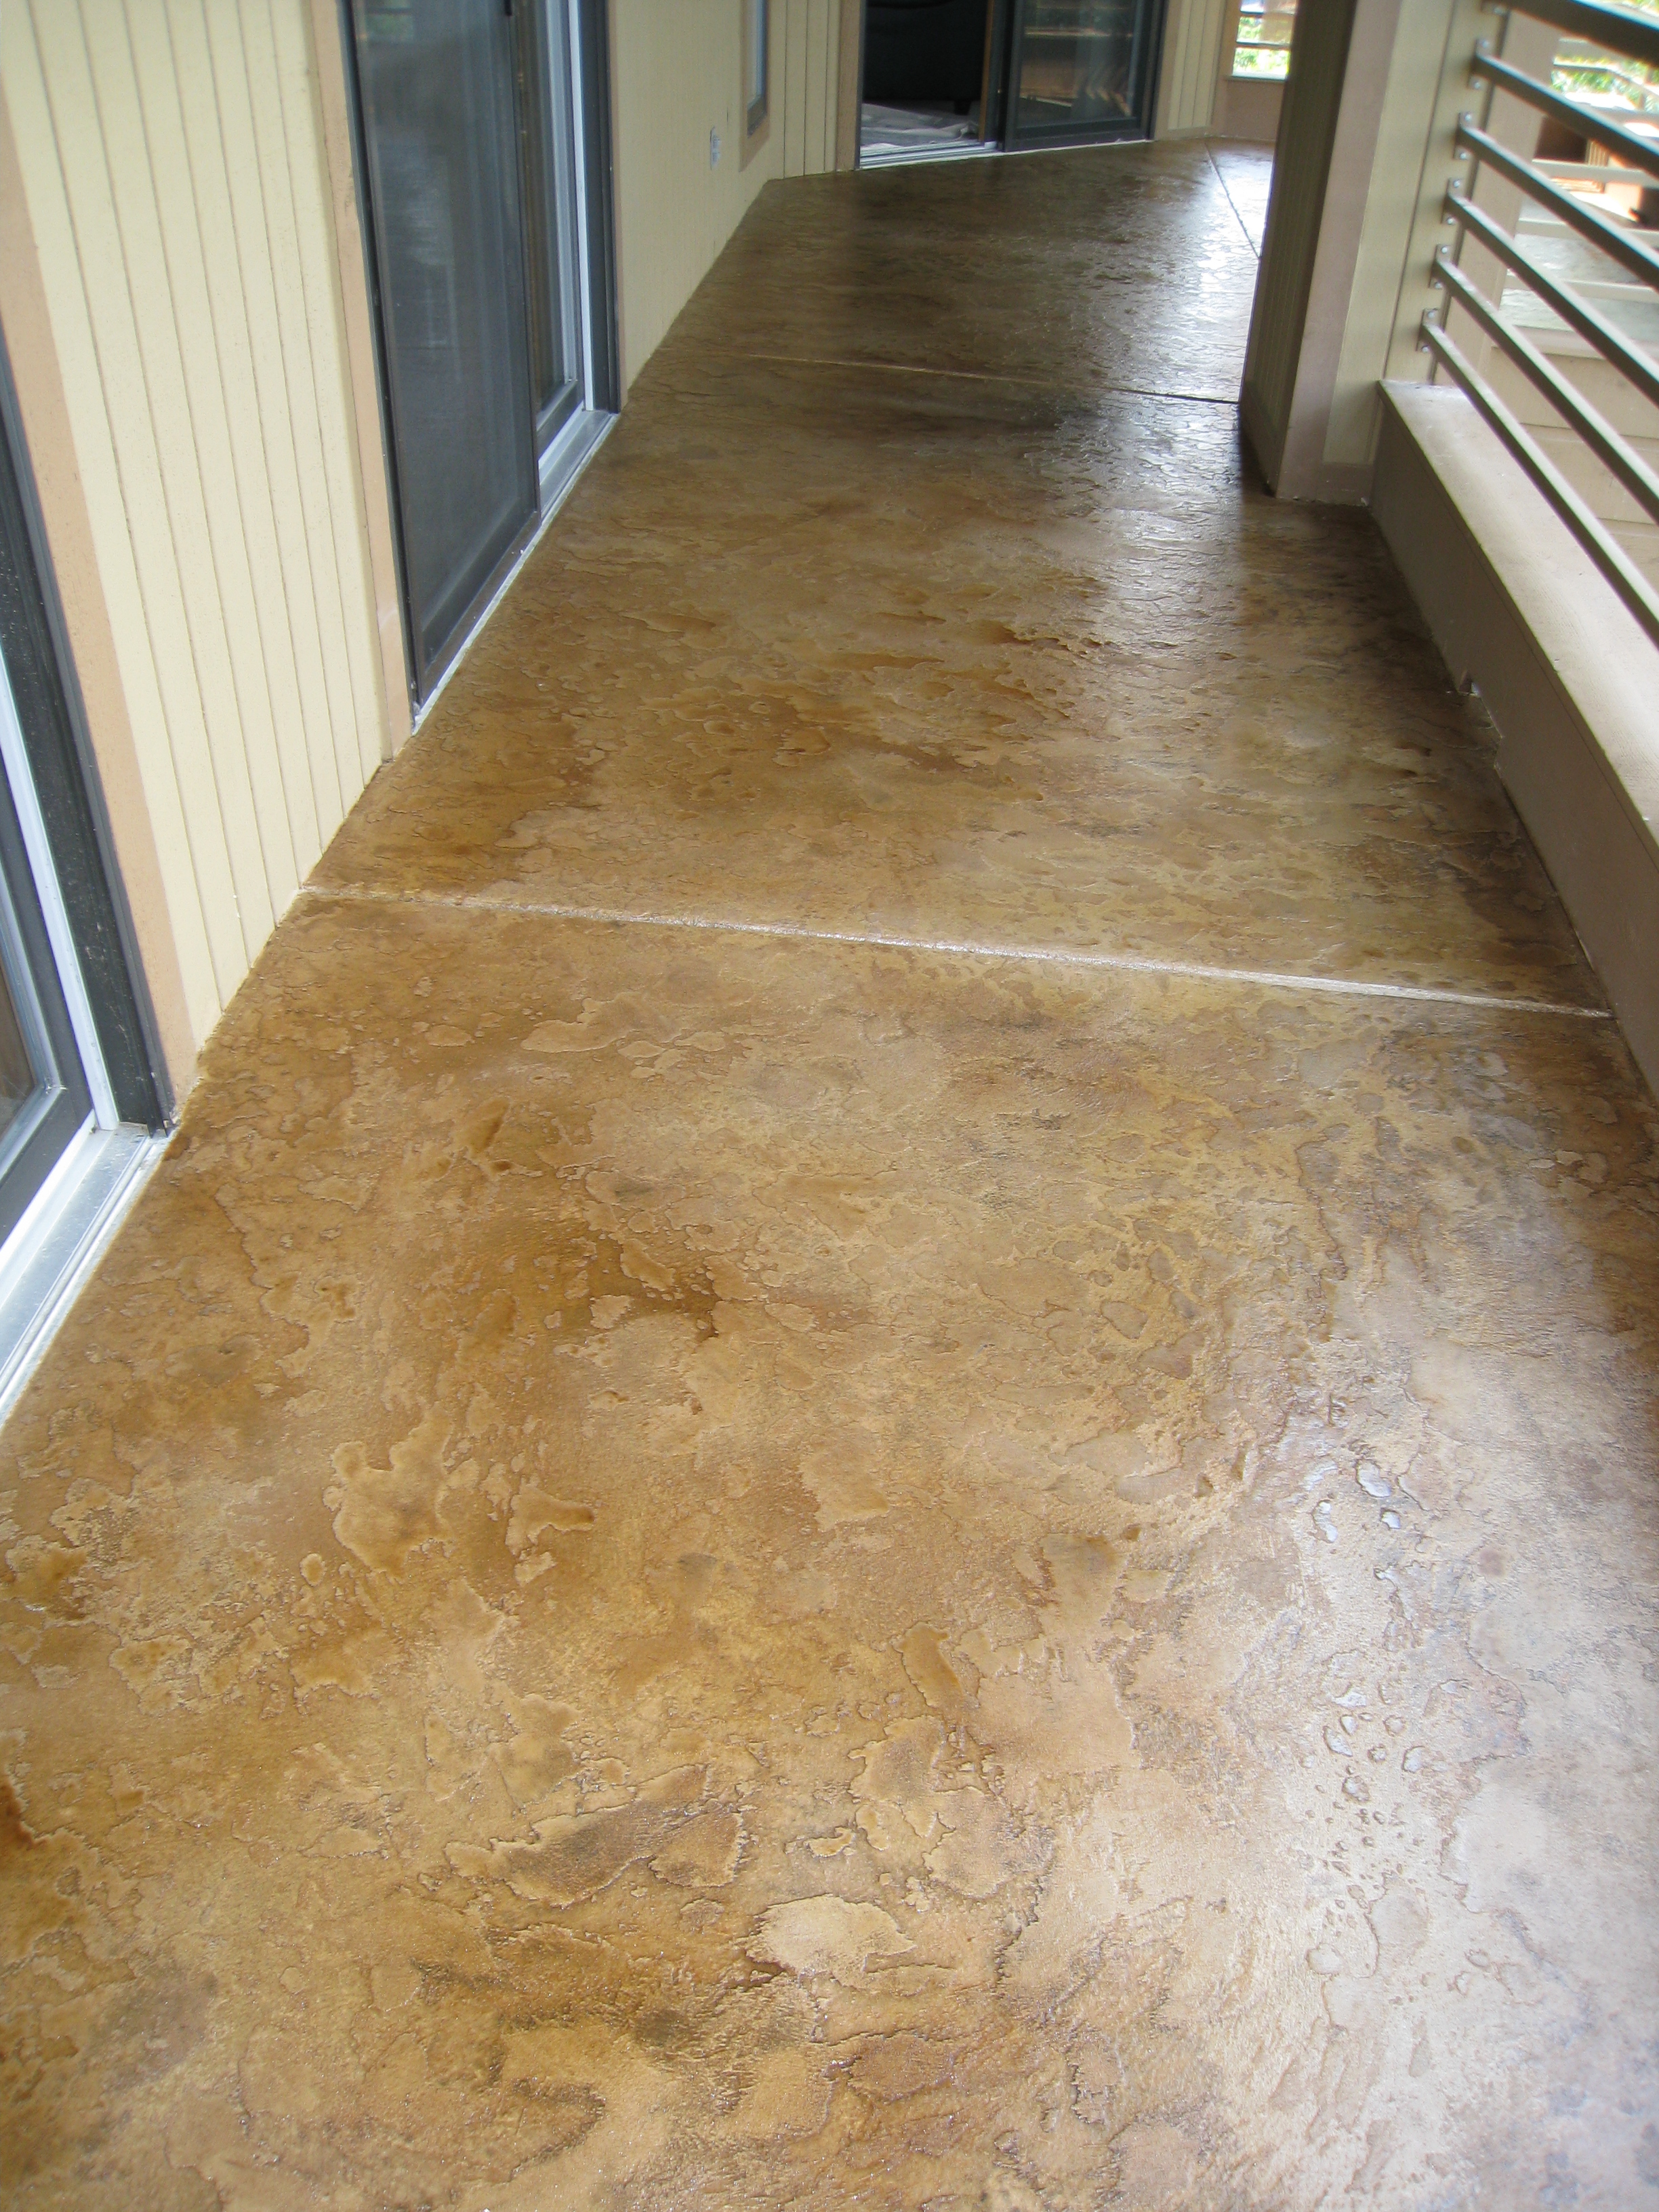 Selecting The Proper Coating For Concrete Floors